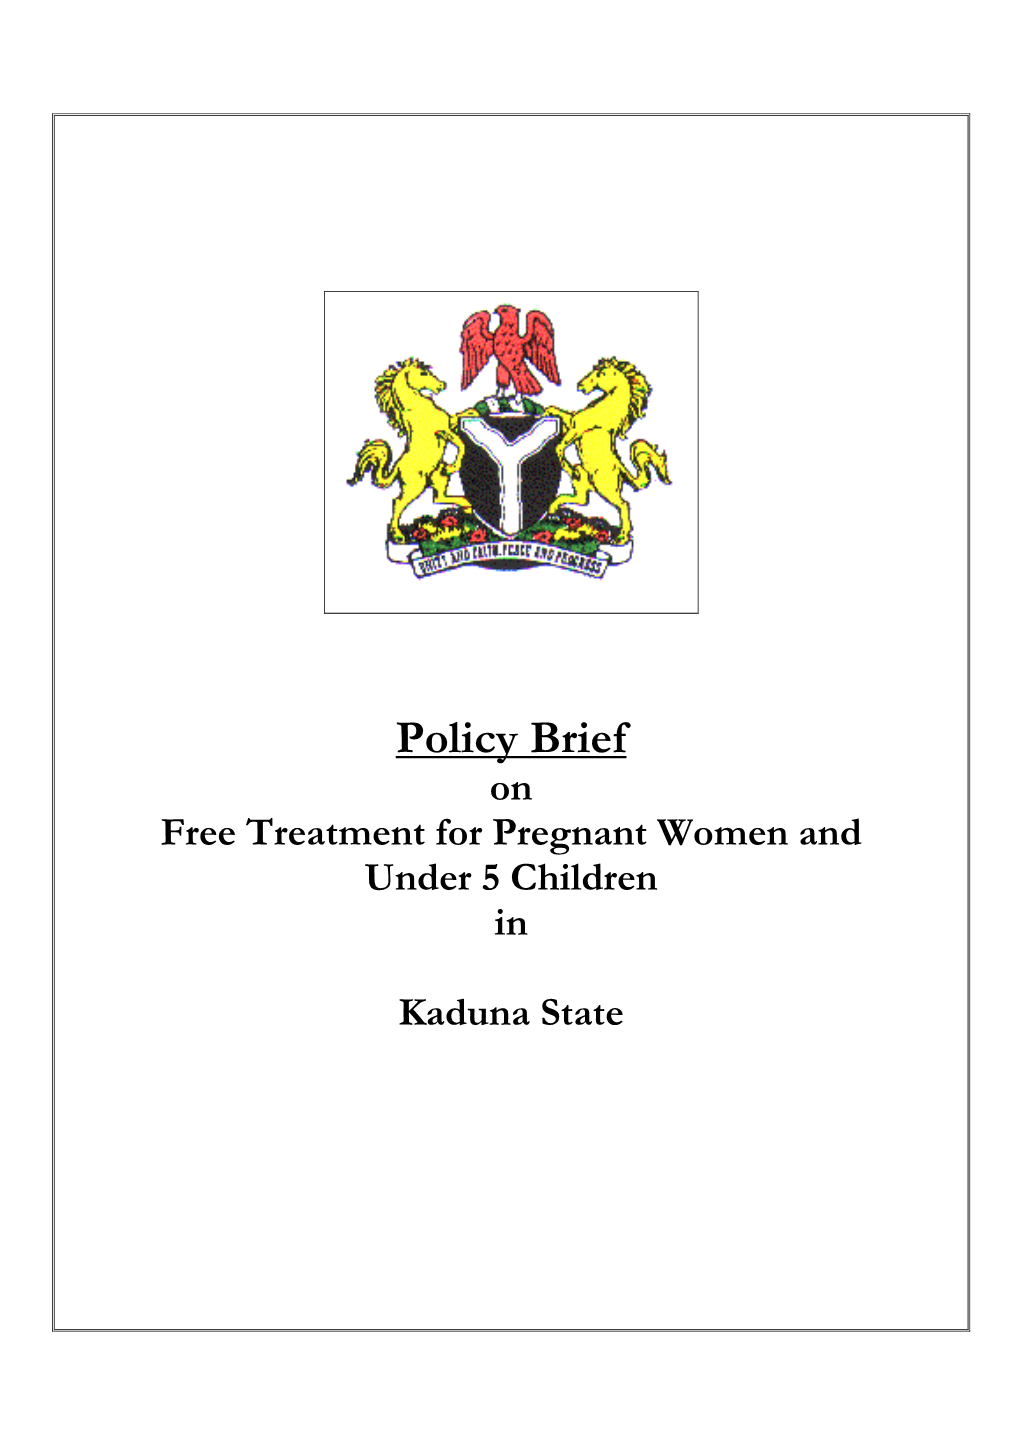 Policy Brief on Free Treatment for Pregnant Women and Under 5 Children In